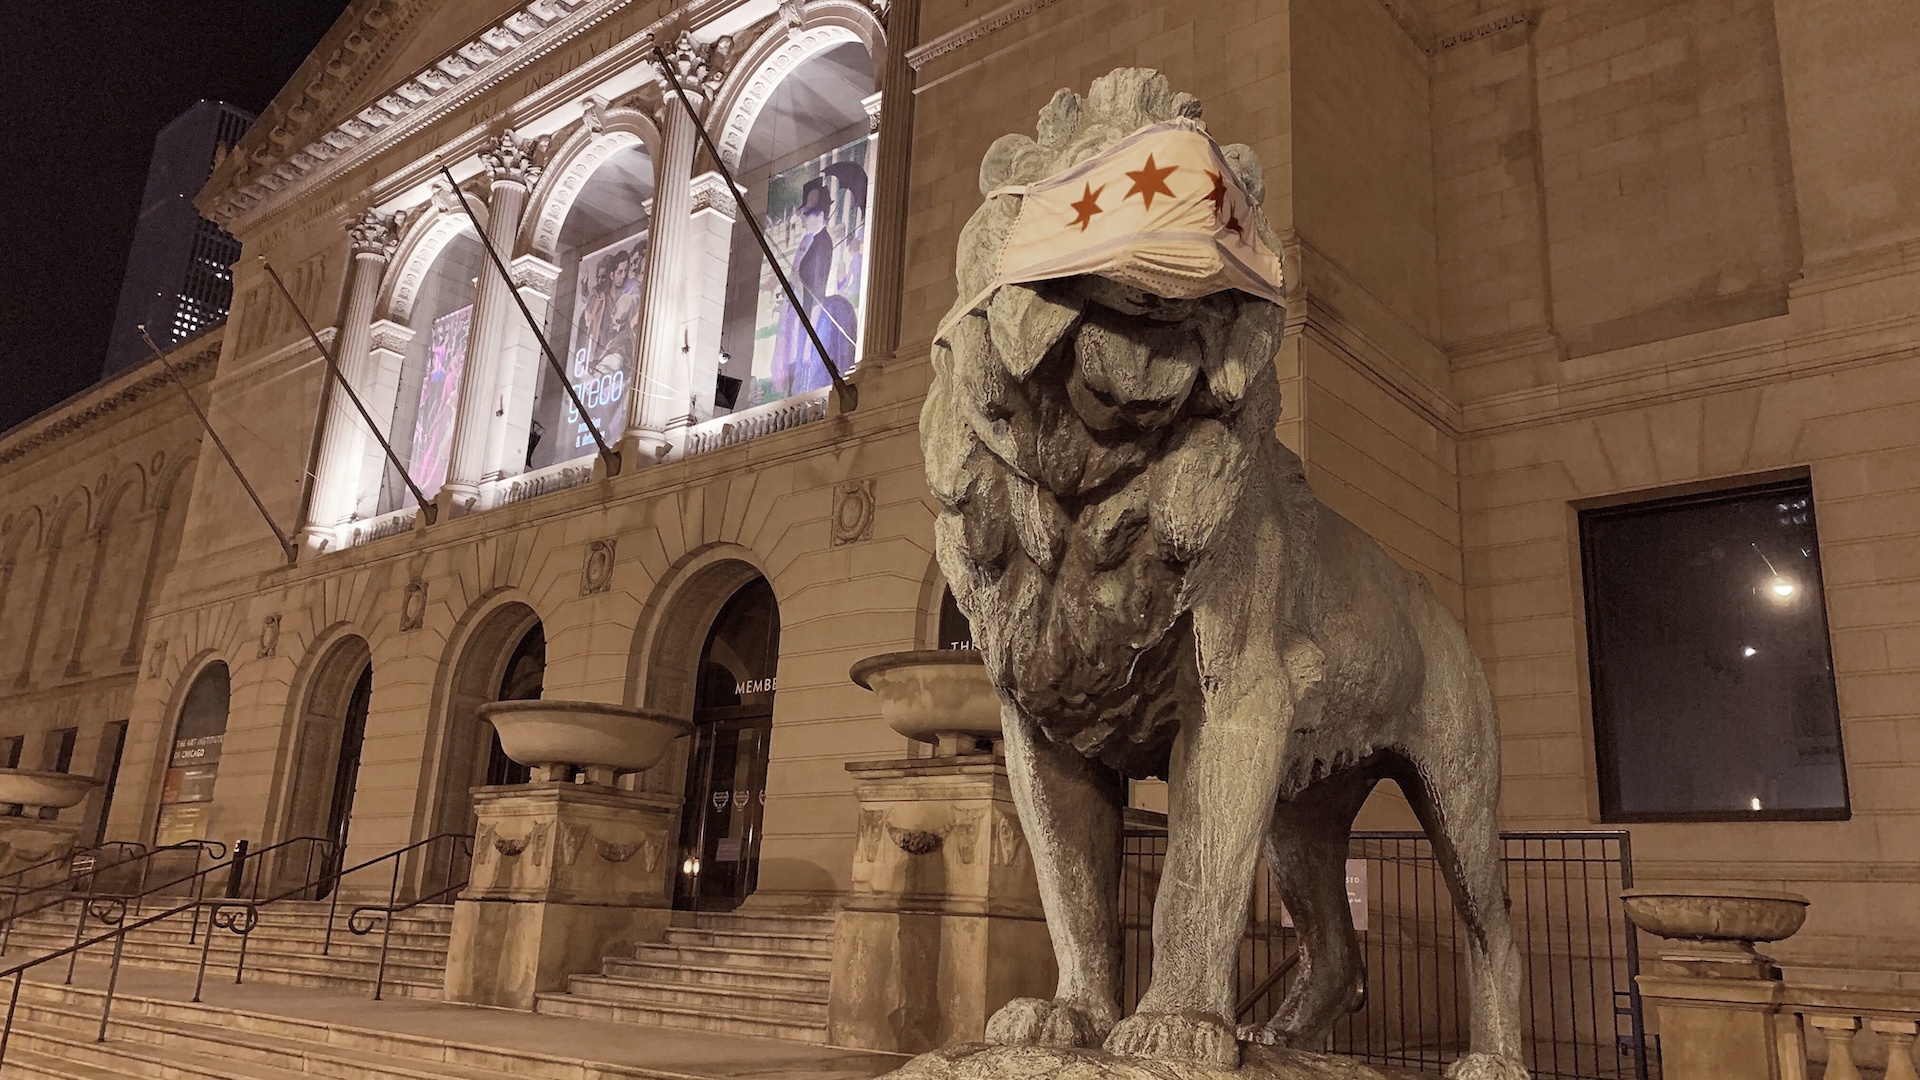 This Friday, May 1, 2020 photo shows a lion statue with a mask placed on it at the Art Institute of Chicago. (Sam Kelly / Chicago Sun-Times via AP)